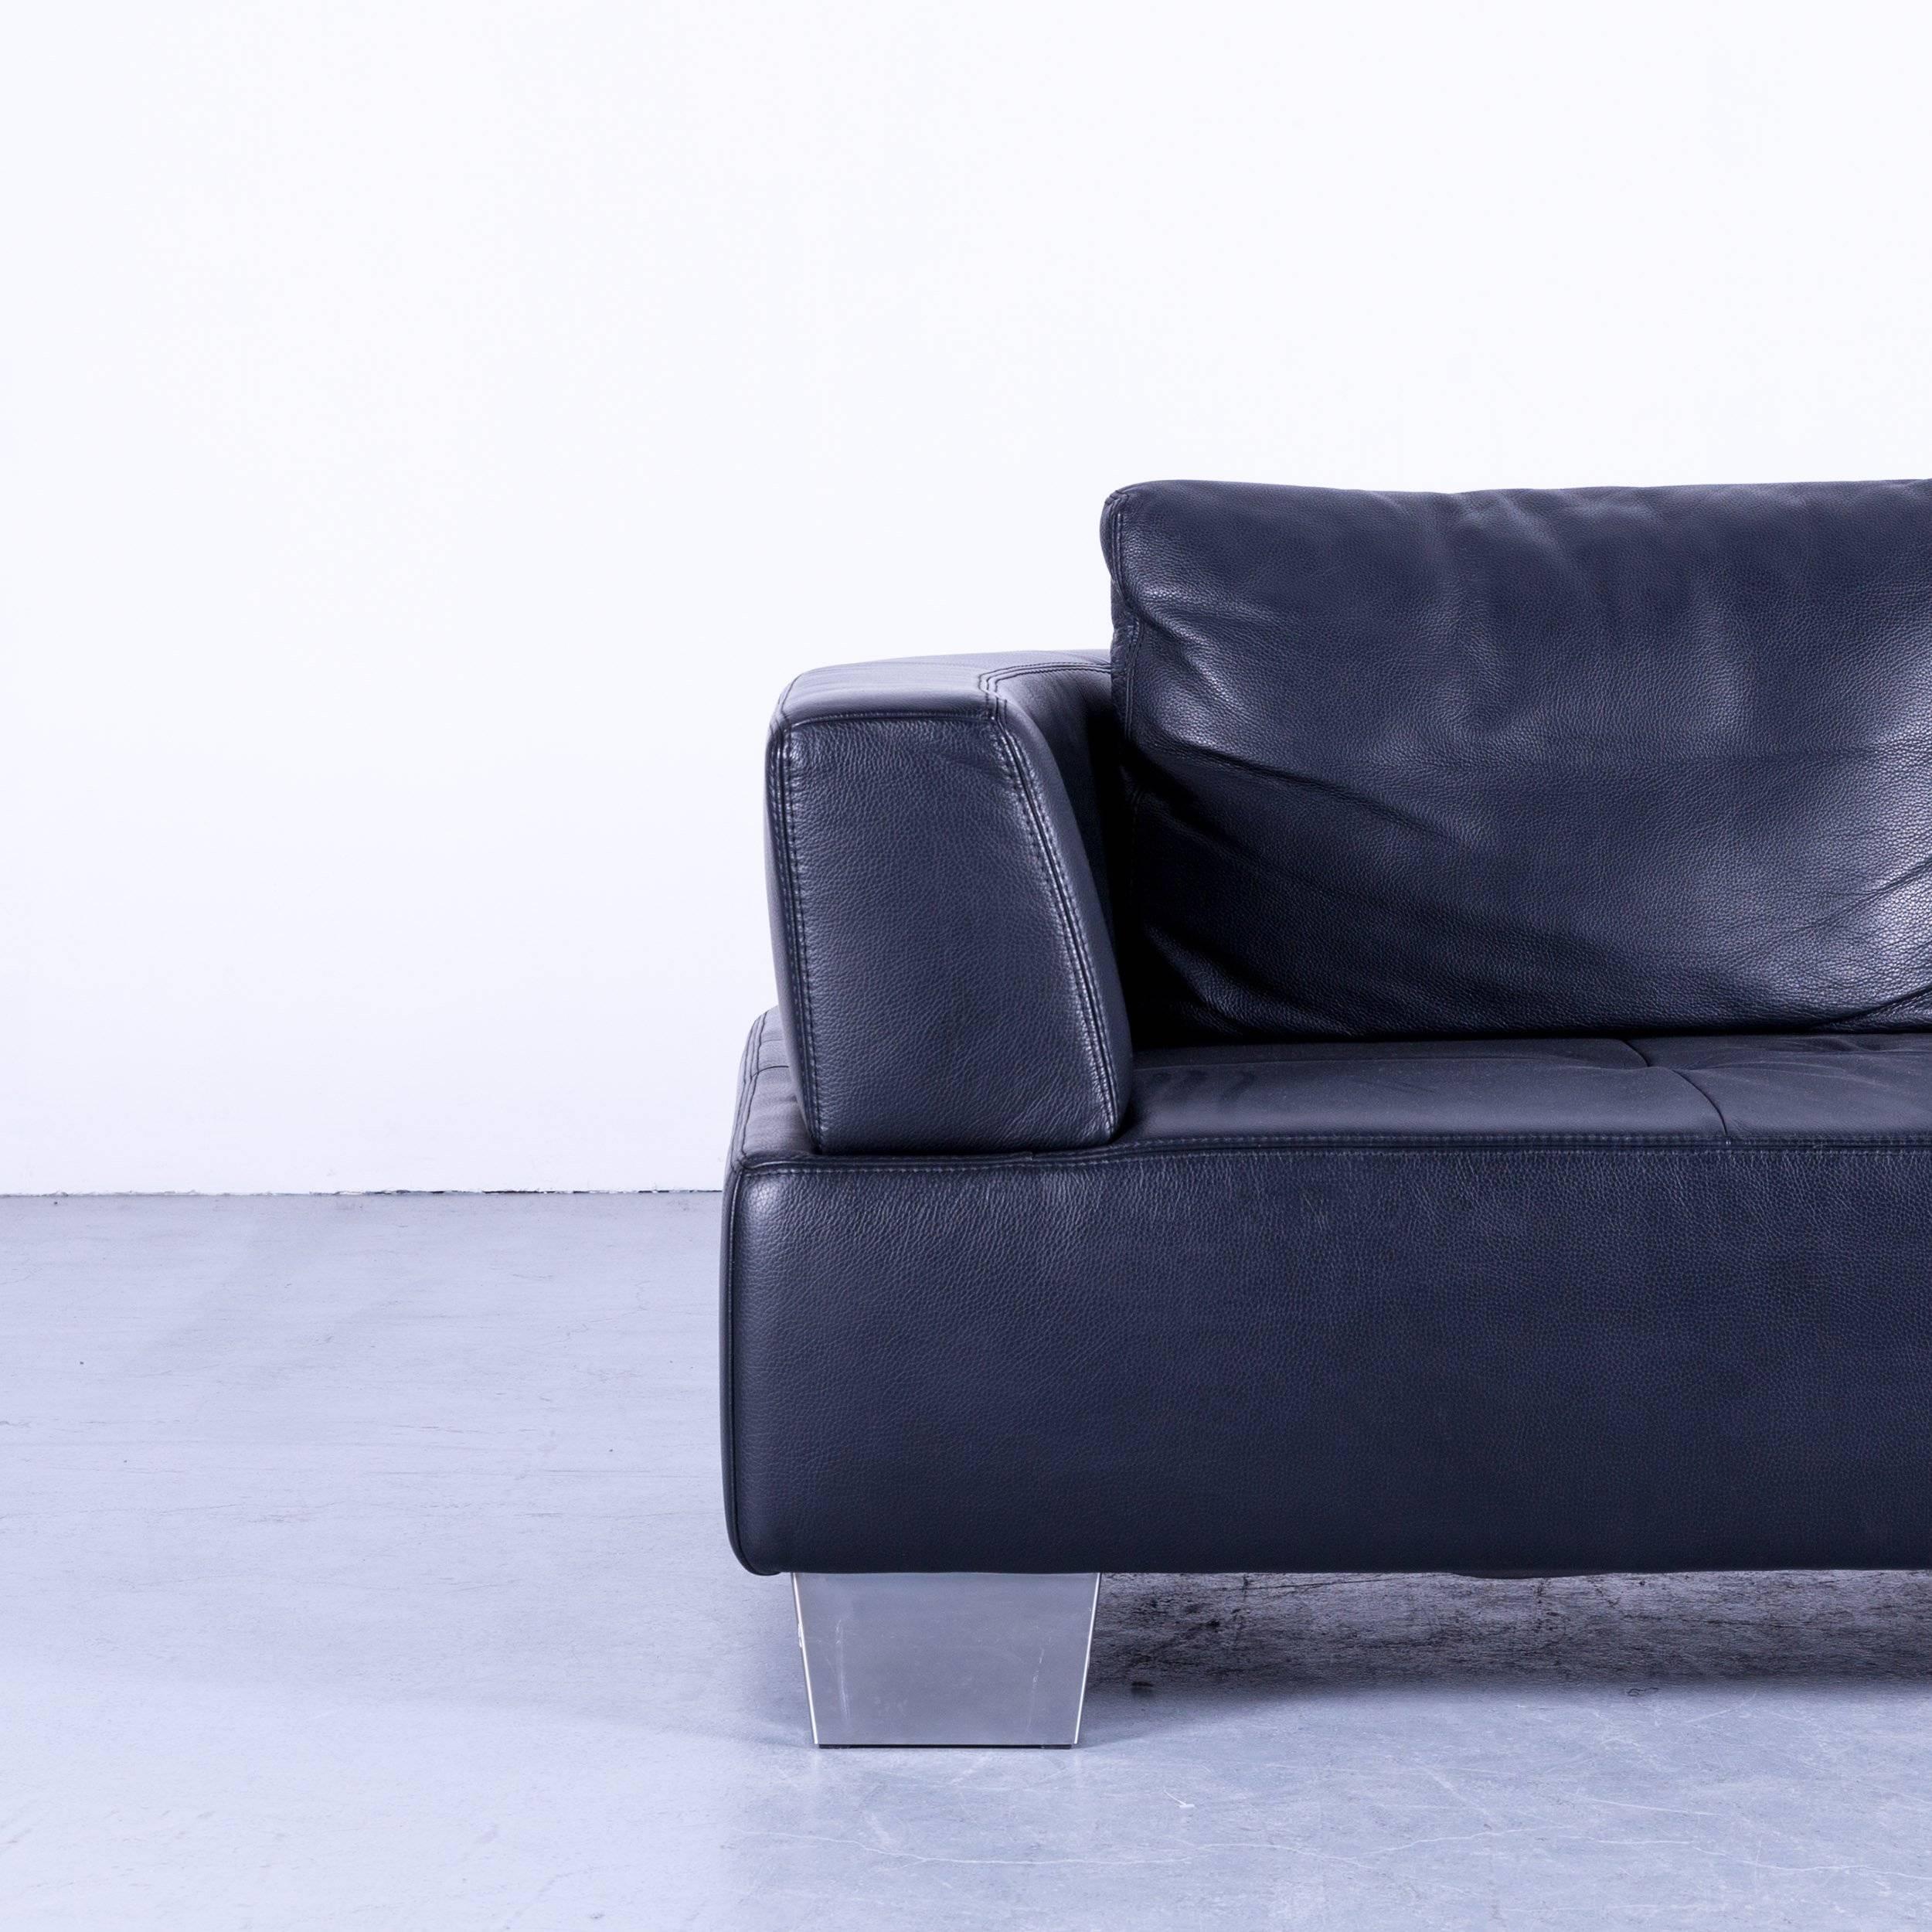 Ewald Schillig moon designer sofa black leather couch three-seat modern, in a minimalistic and modern design, made for pure comfort and style.